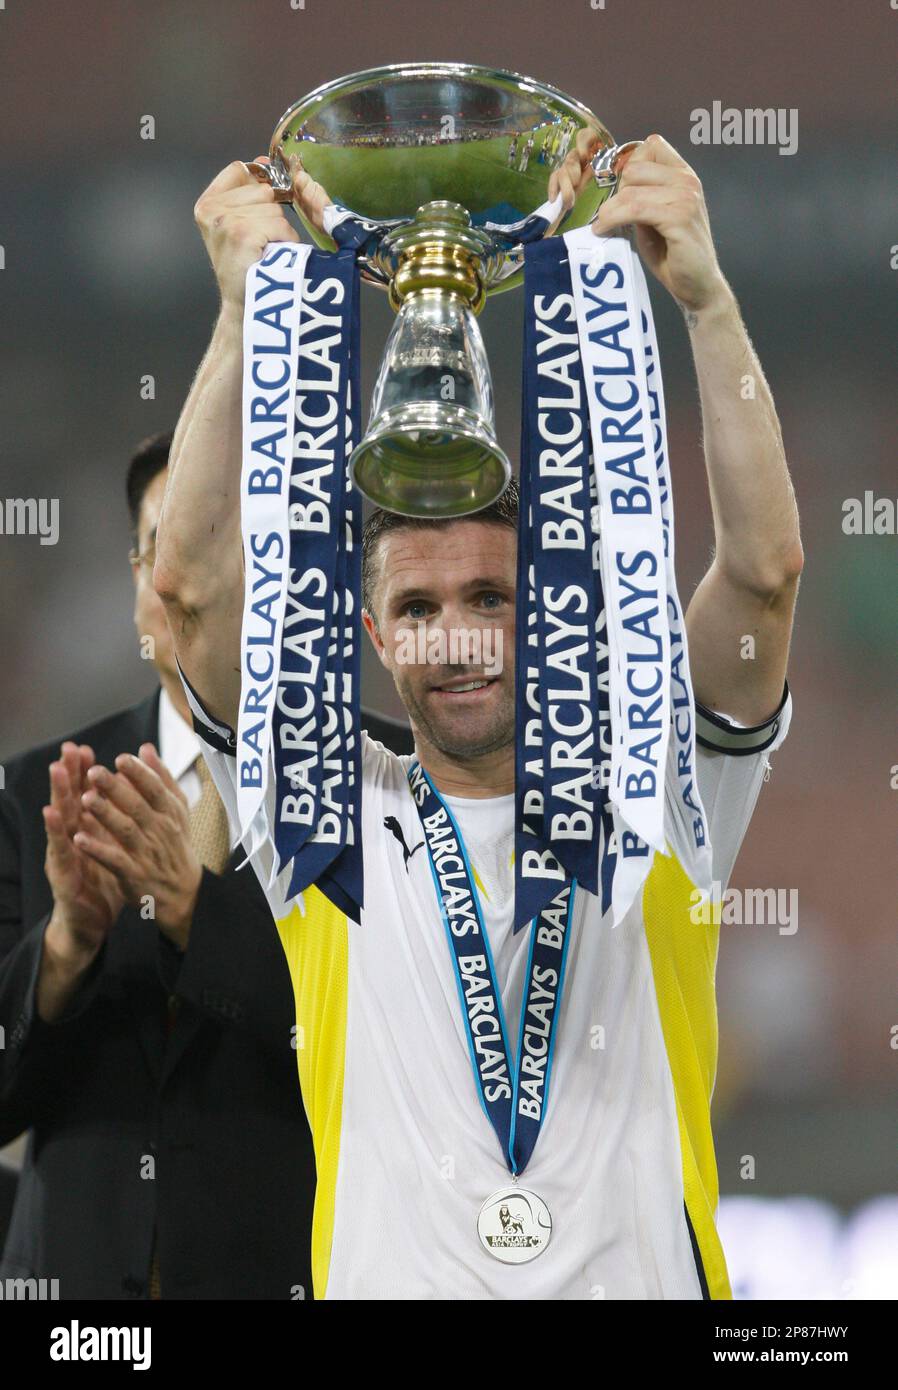 Tottenham Hotspur`s Robbie Keane with the trophy Barclays Asia